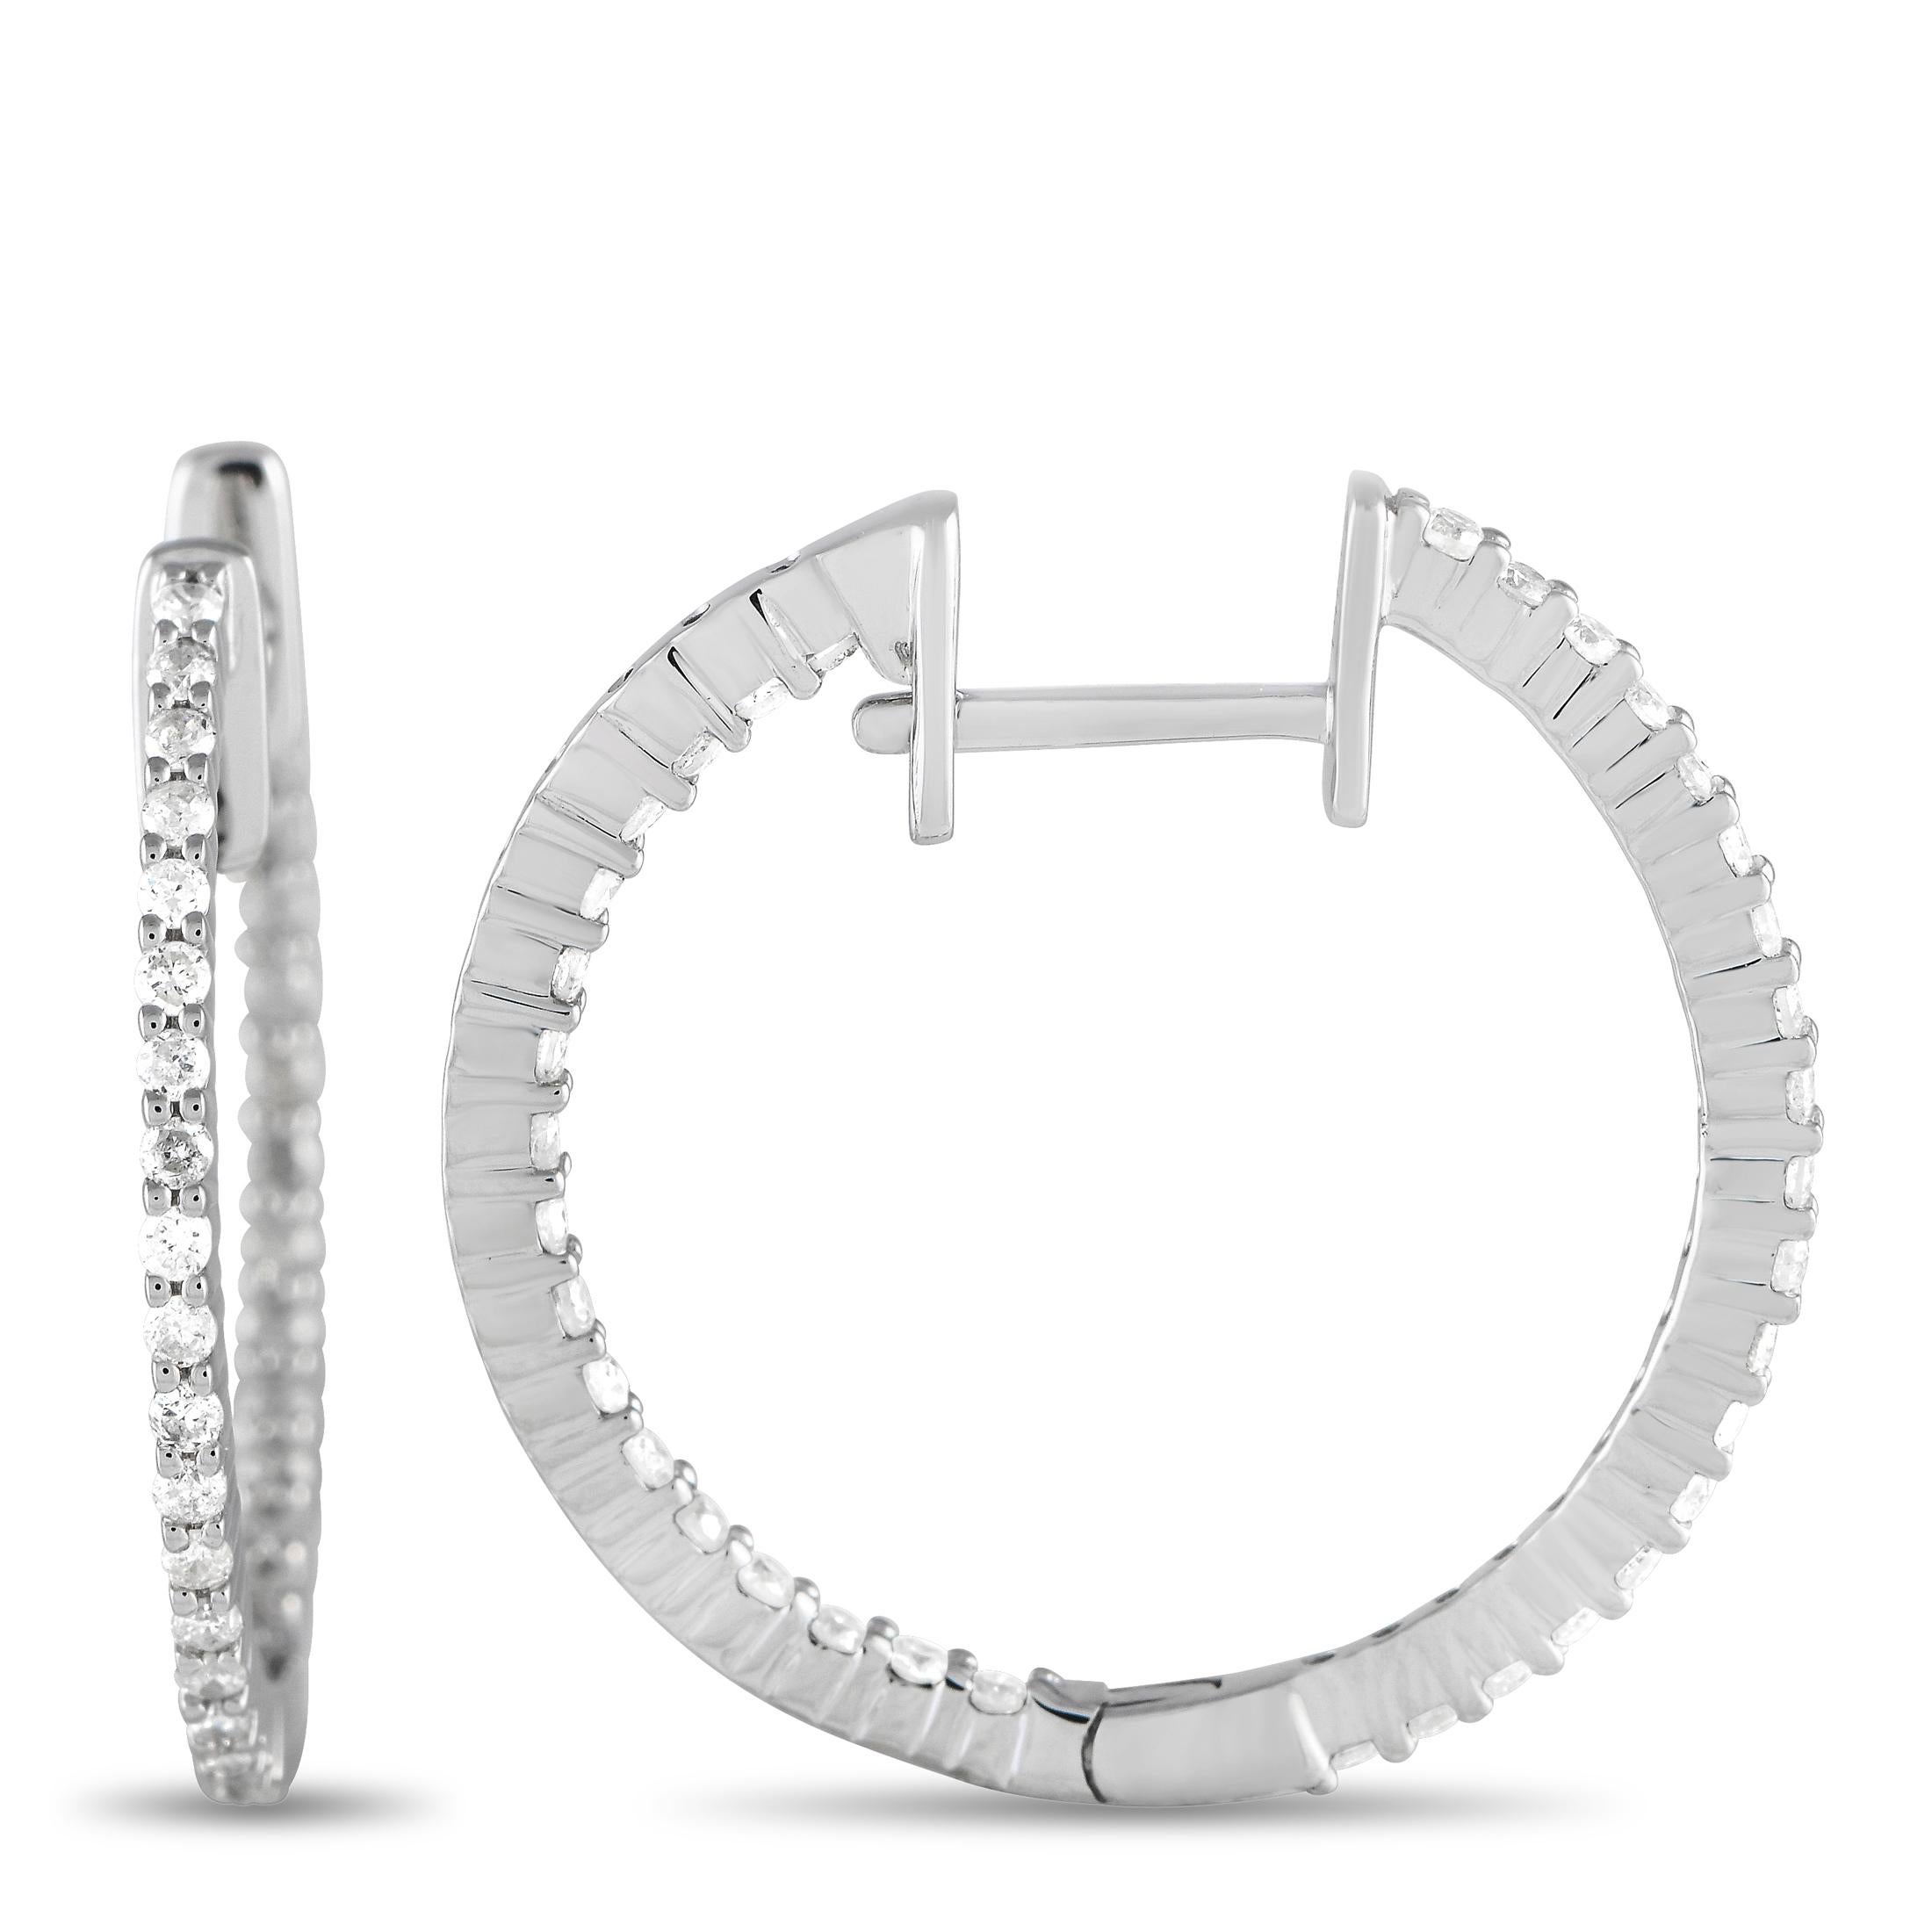 These delicate hoop earrings will beautifully complement any ensemble. Each one features a simple 14K White Gold setting measuring 0.80” round. Sparkling diamonds with a total weight of 0.55 carats allow them to effortlessly catch the light. 

This